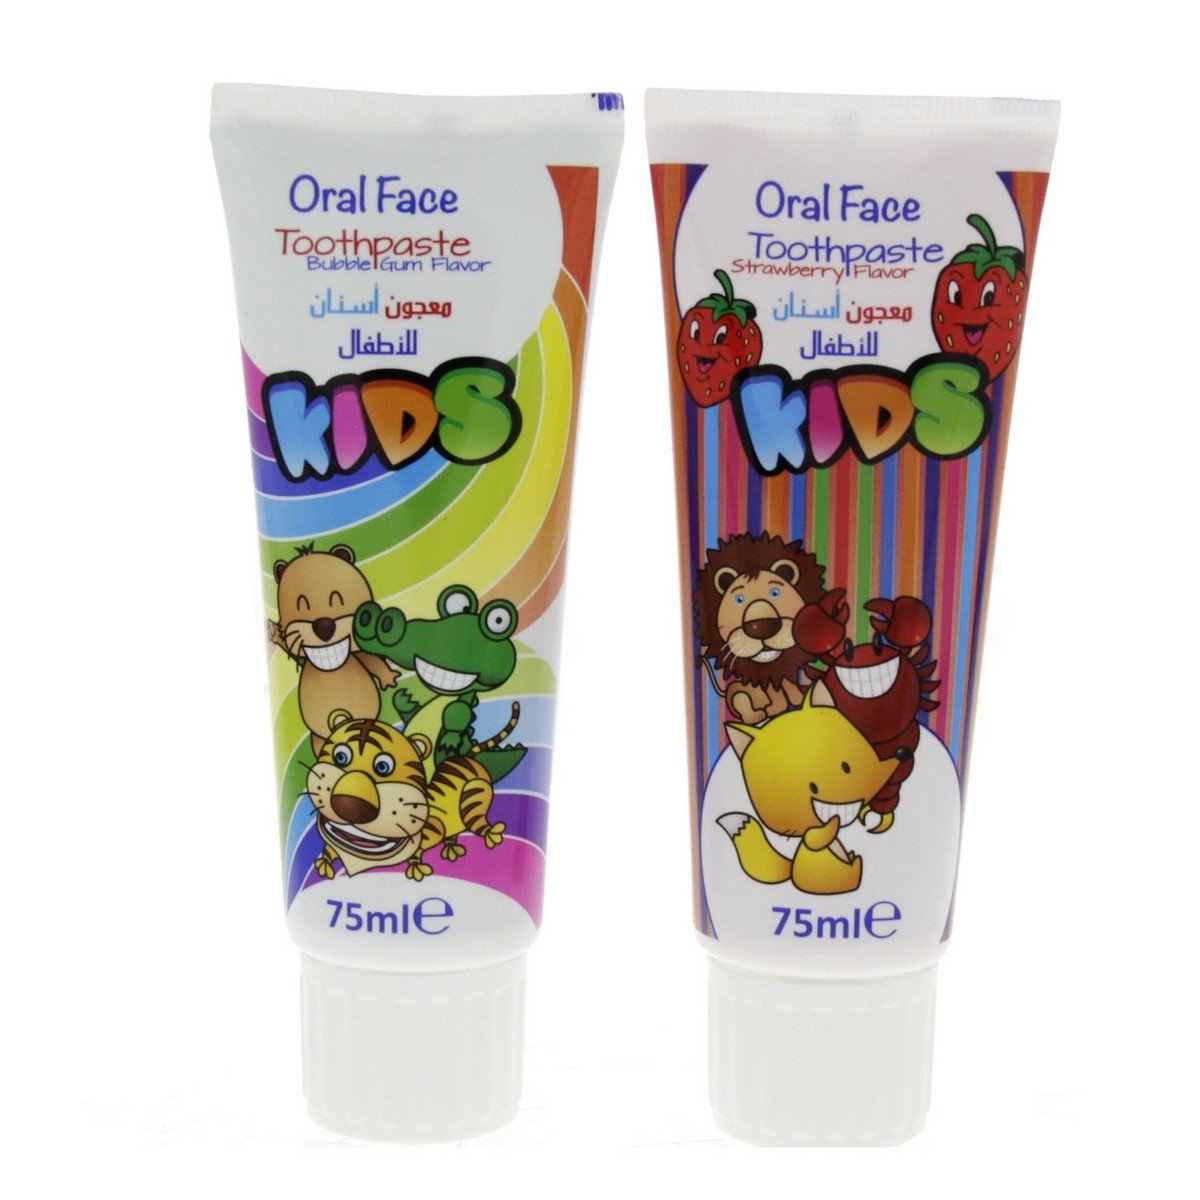 Oral Face Kids Toothpaste Assorted Flavor 2 x 75 ml